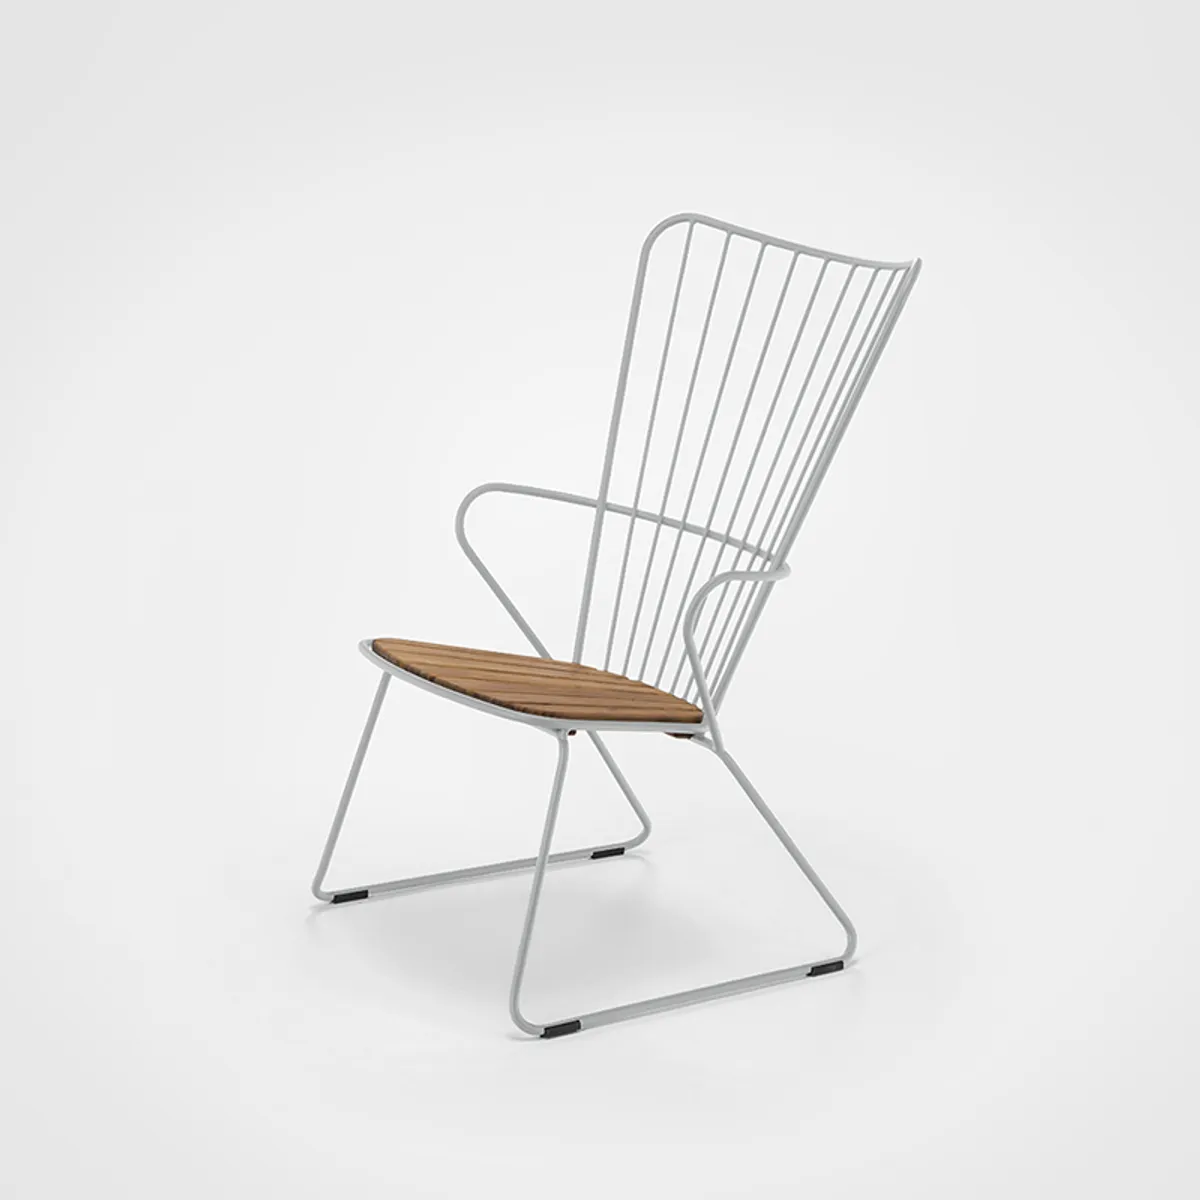 Plumage High Back Chair In White Metal With Bamboo Seat For Outdoor Use